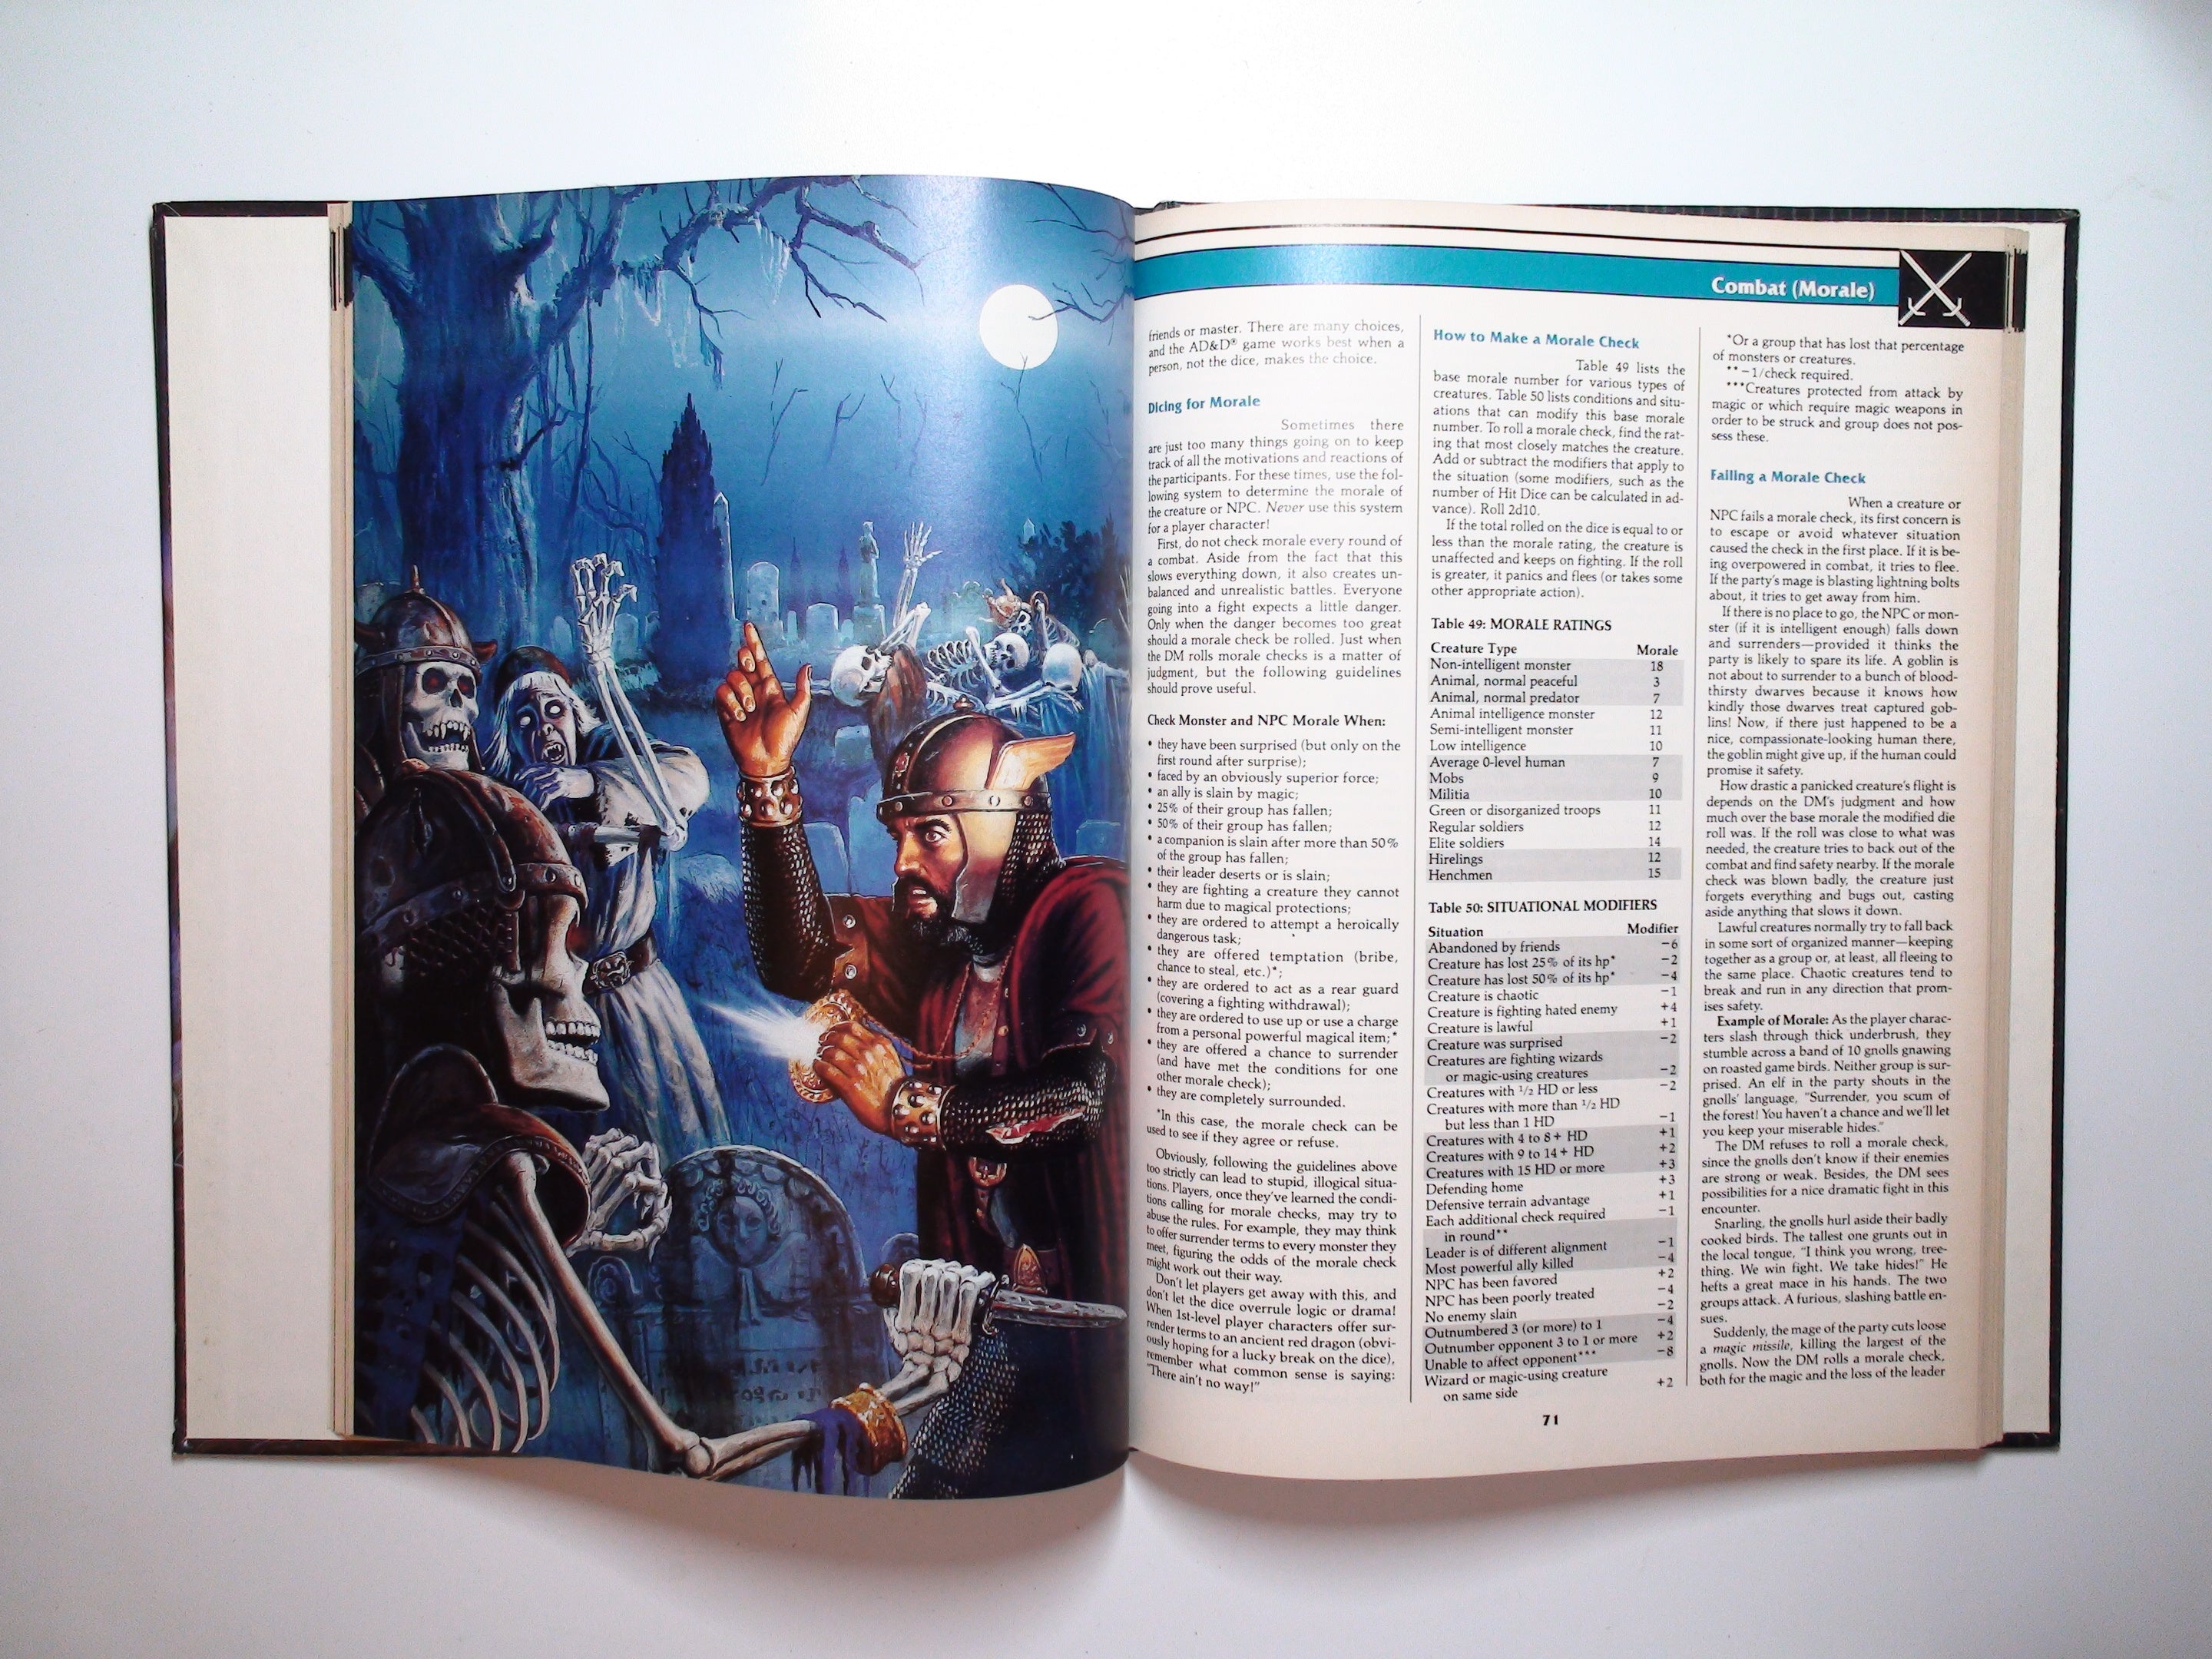 Dungeon Master's Guide, David Cook, AD&D 2nd Ed, TSR, #2100, 1989, Illustrated